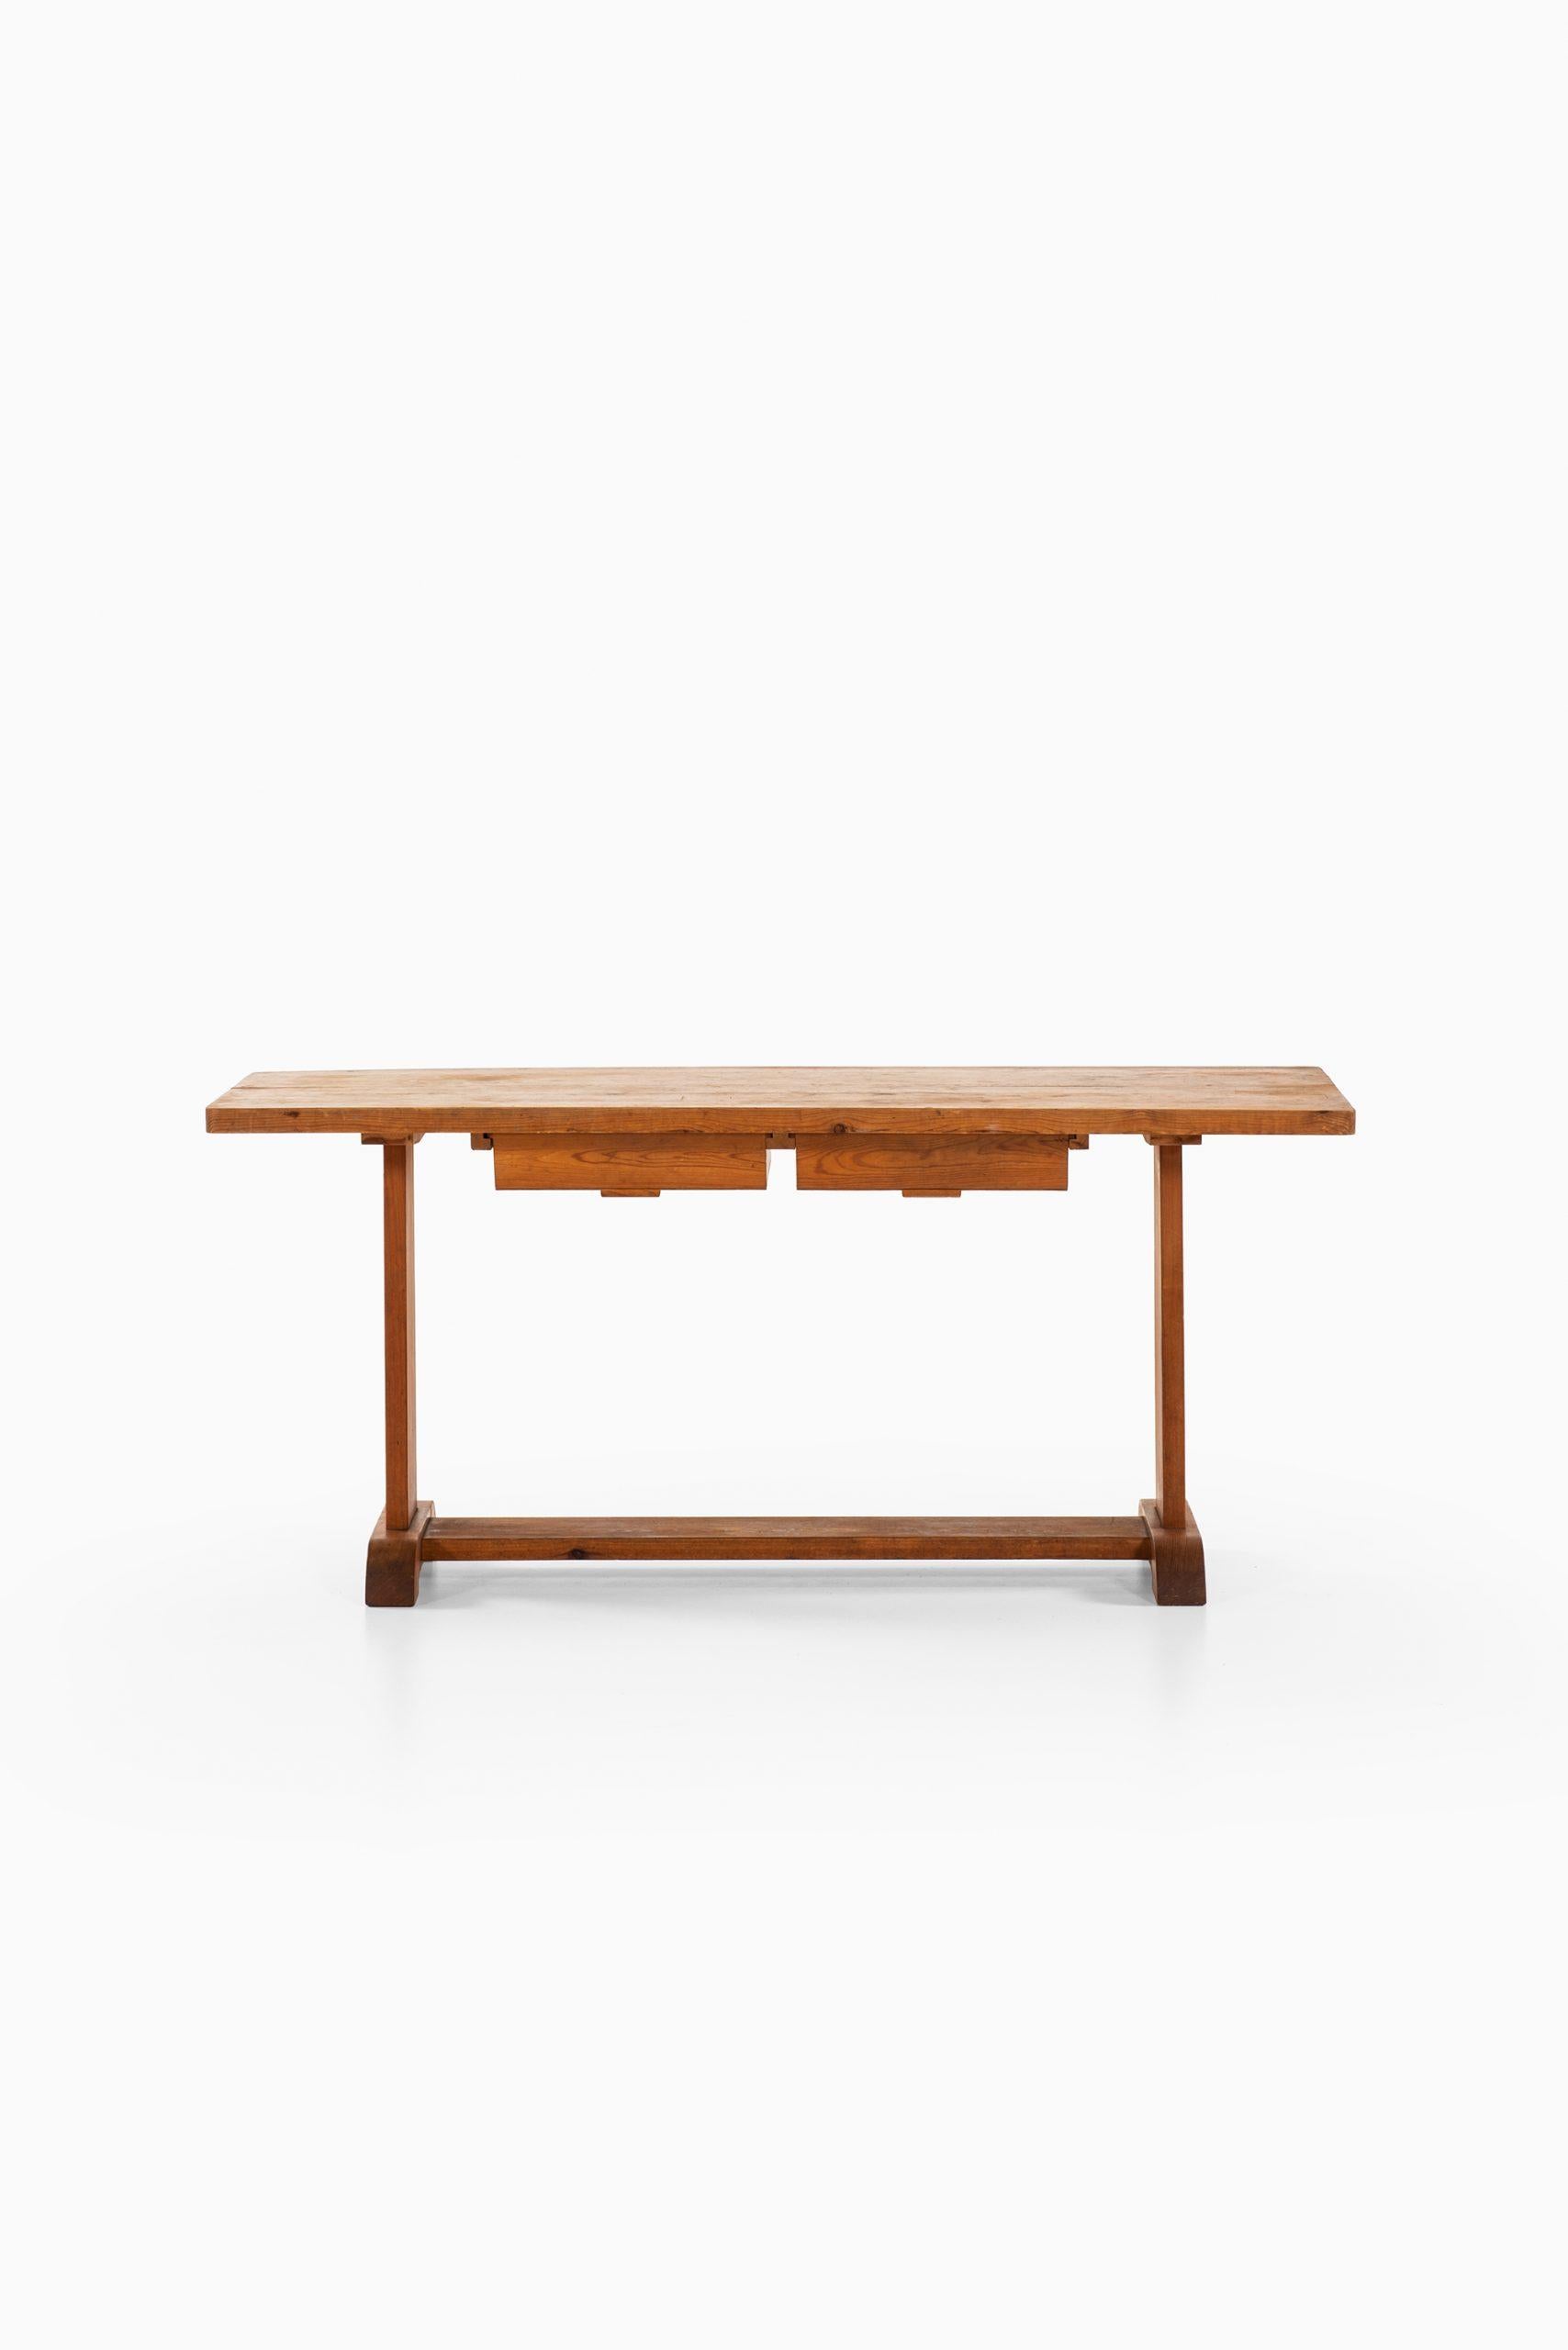 Rare desk / dining table. Produced in Sweden.